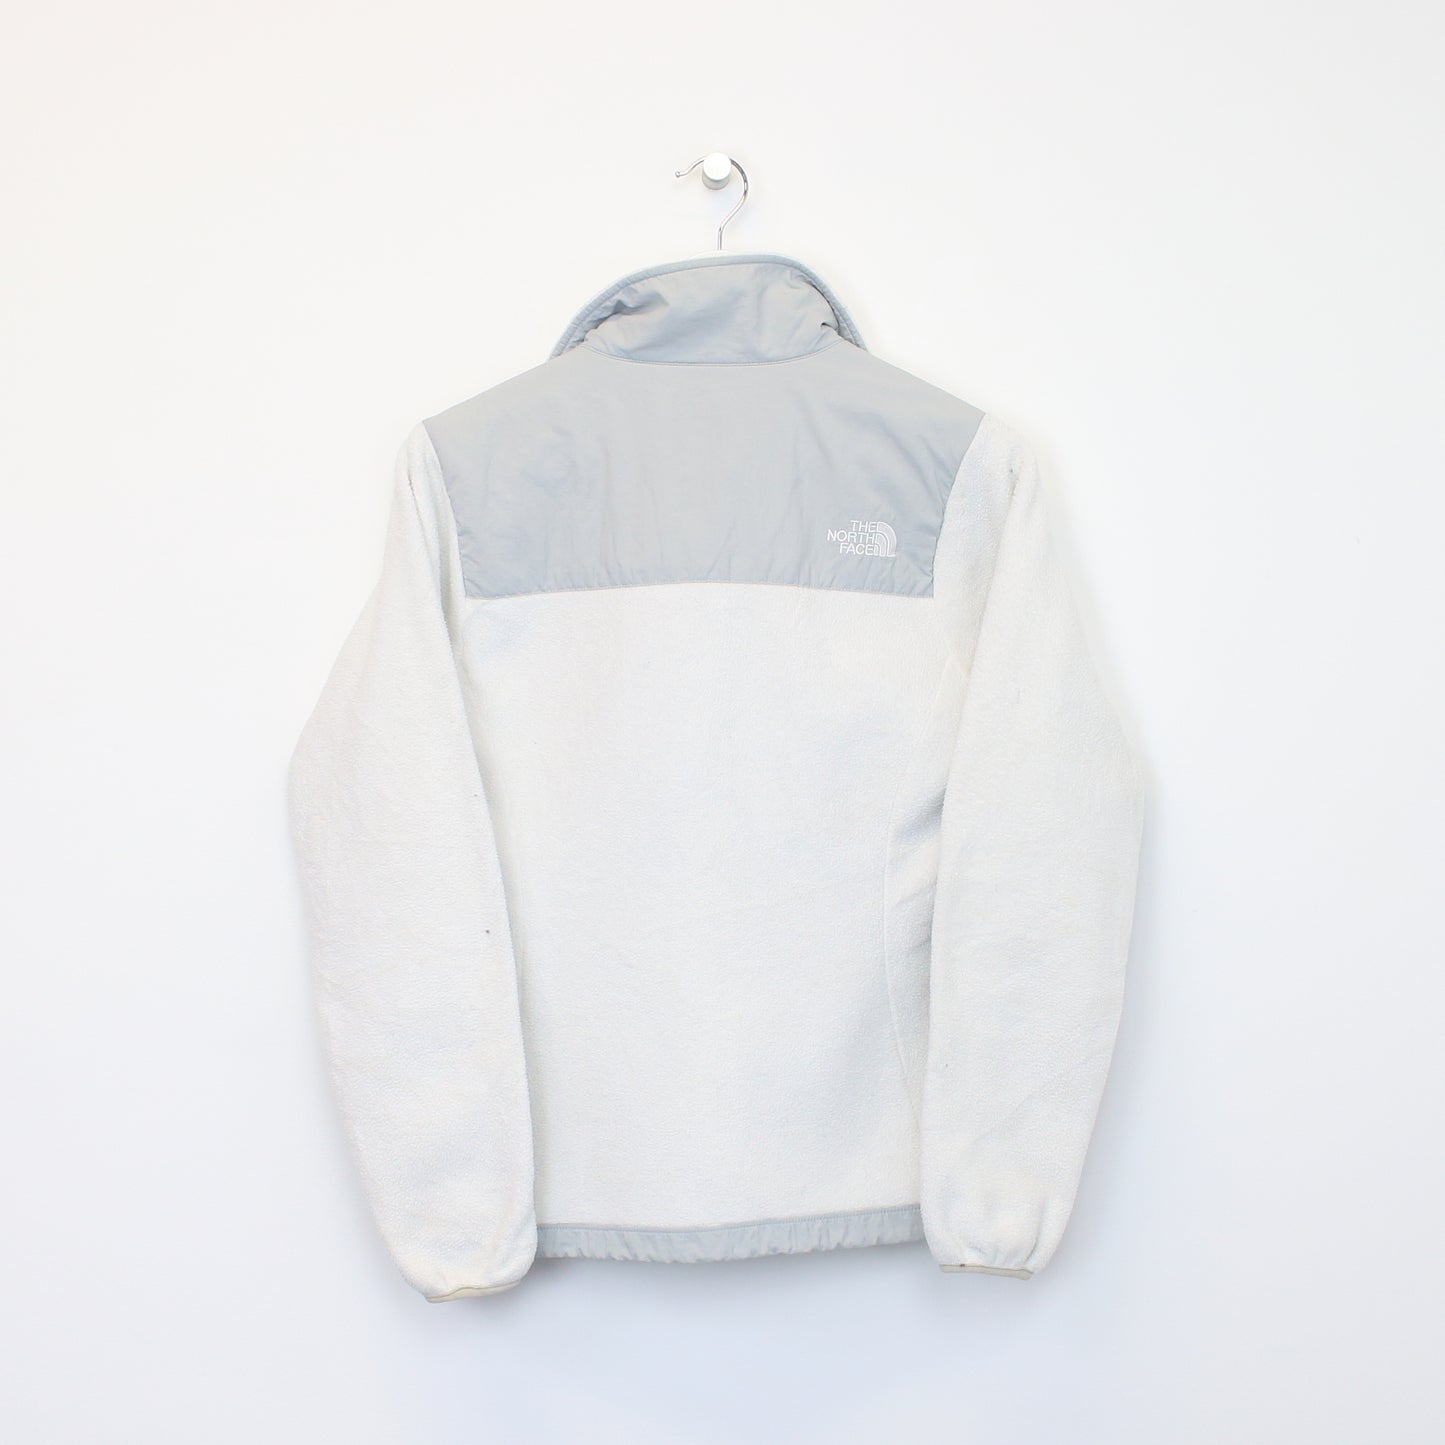 Vintage women's The North Face fleece in white. Best fits XS